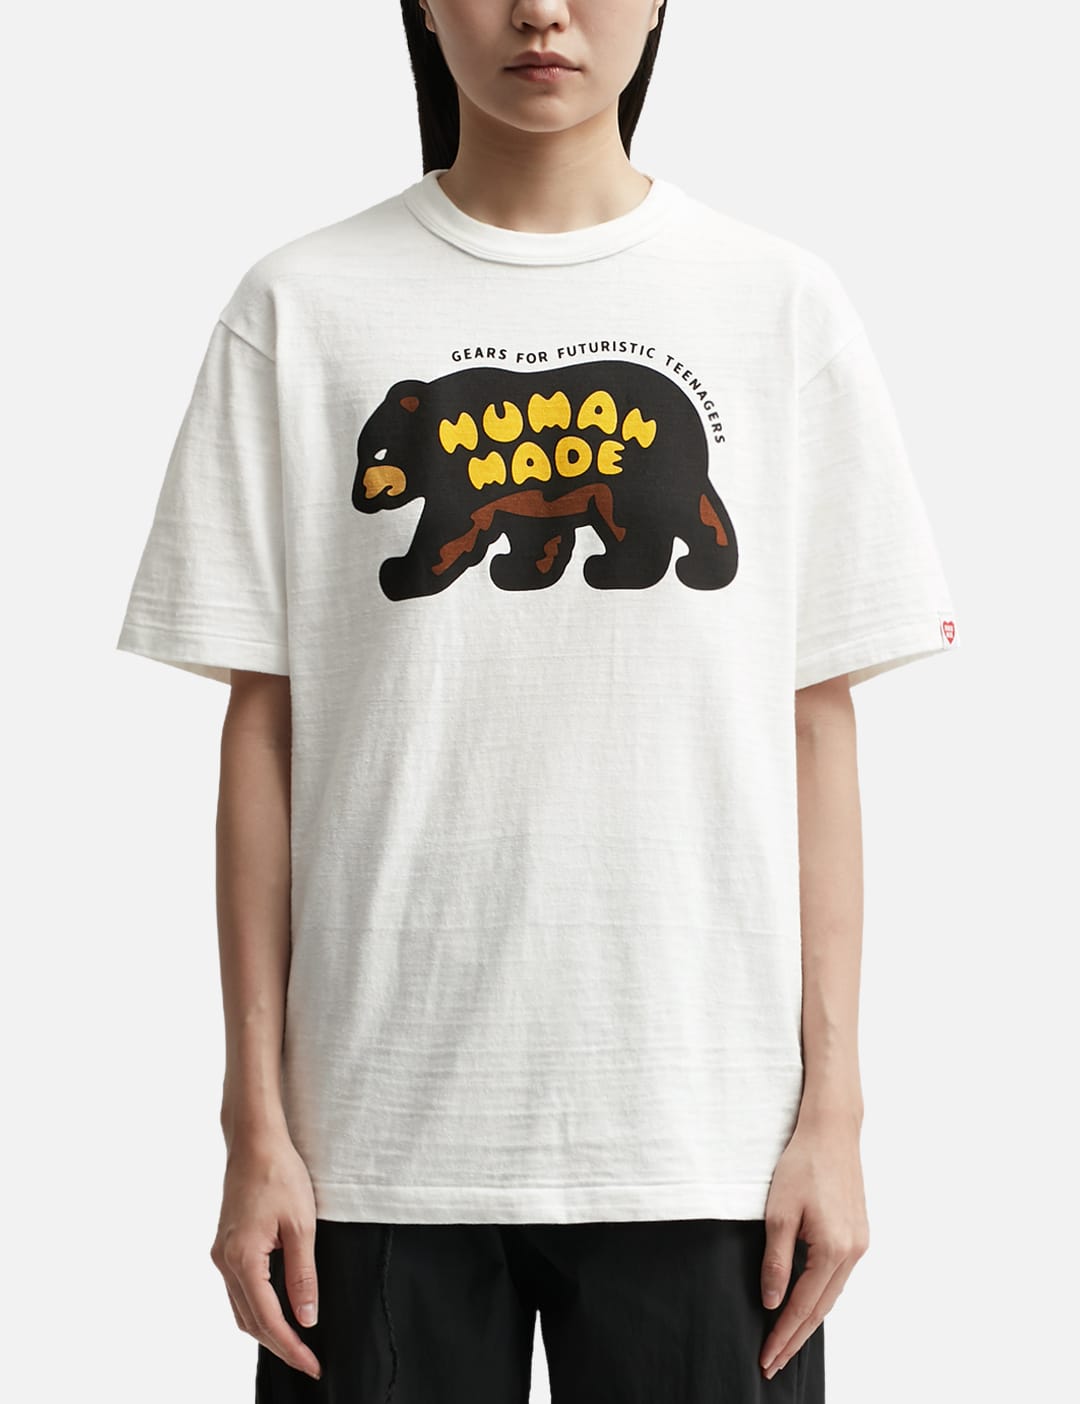 Human Made - GRAPHIC T-SHIRT #10 | HBX - Globally Curated Fashion